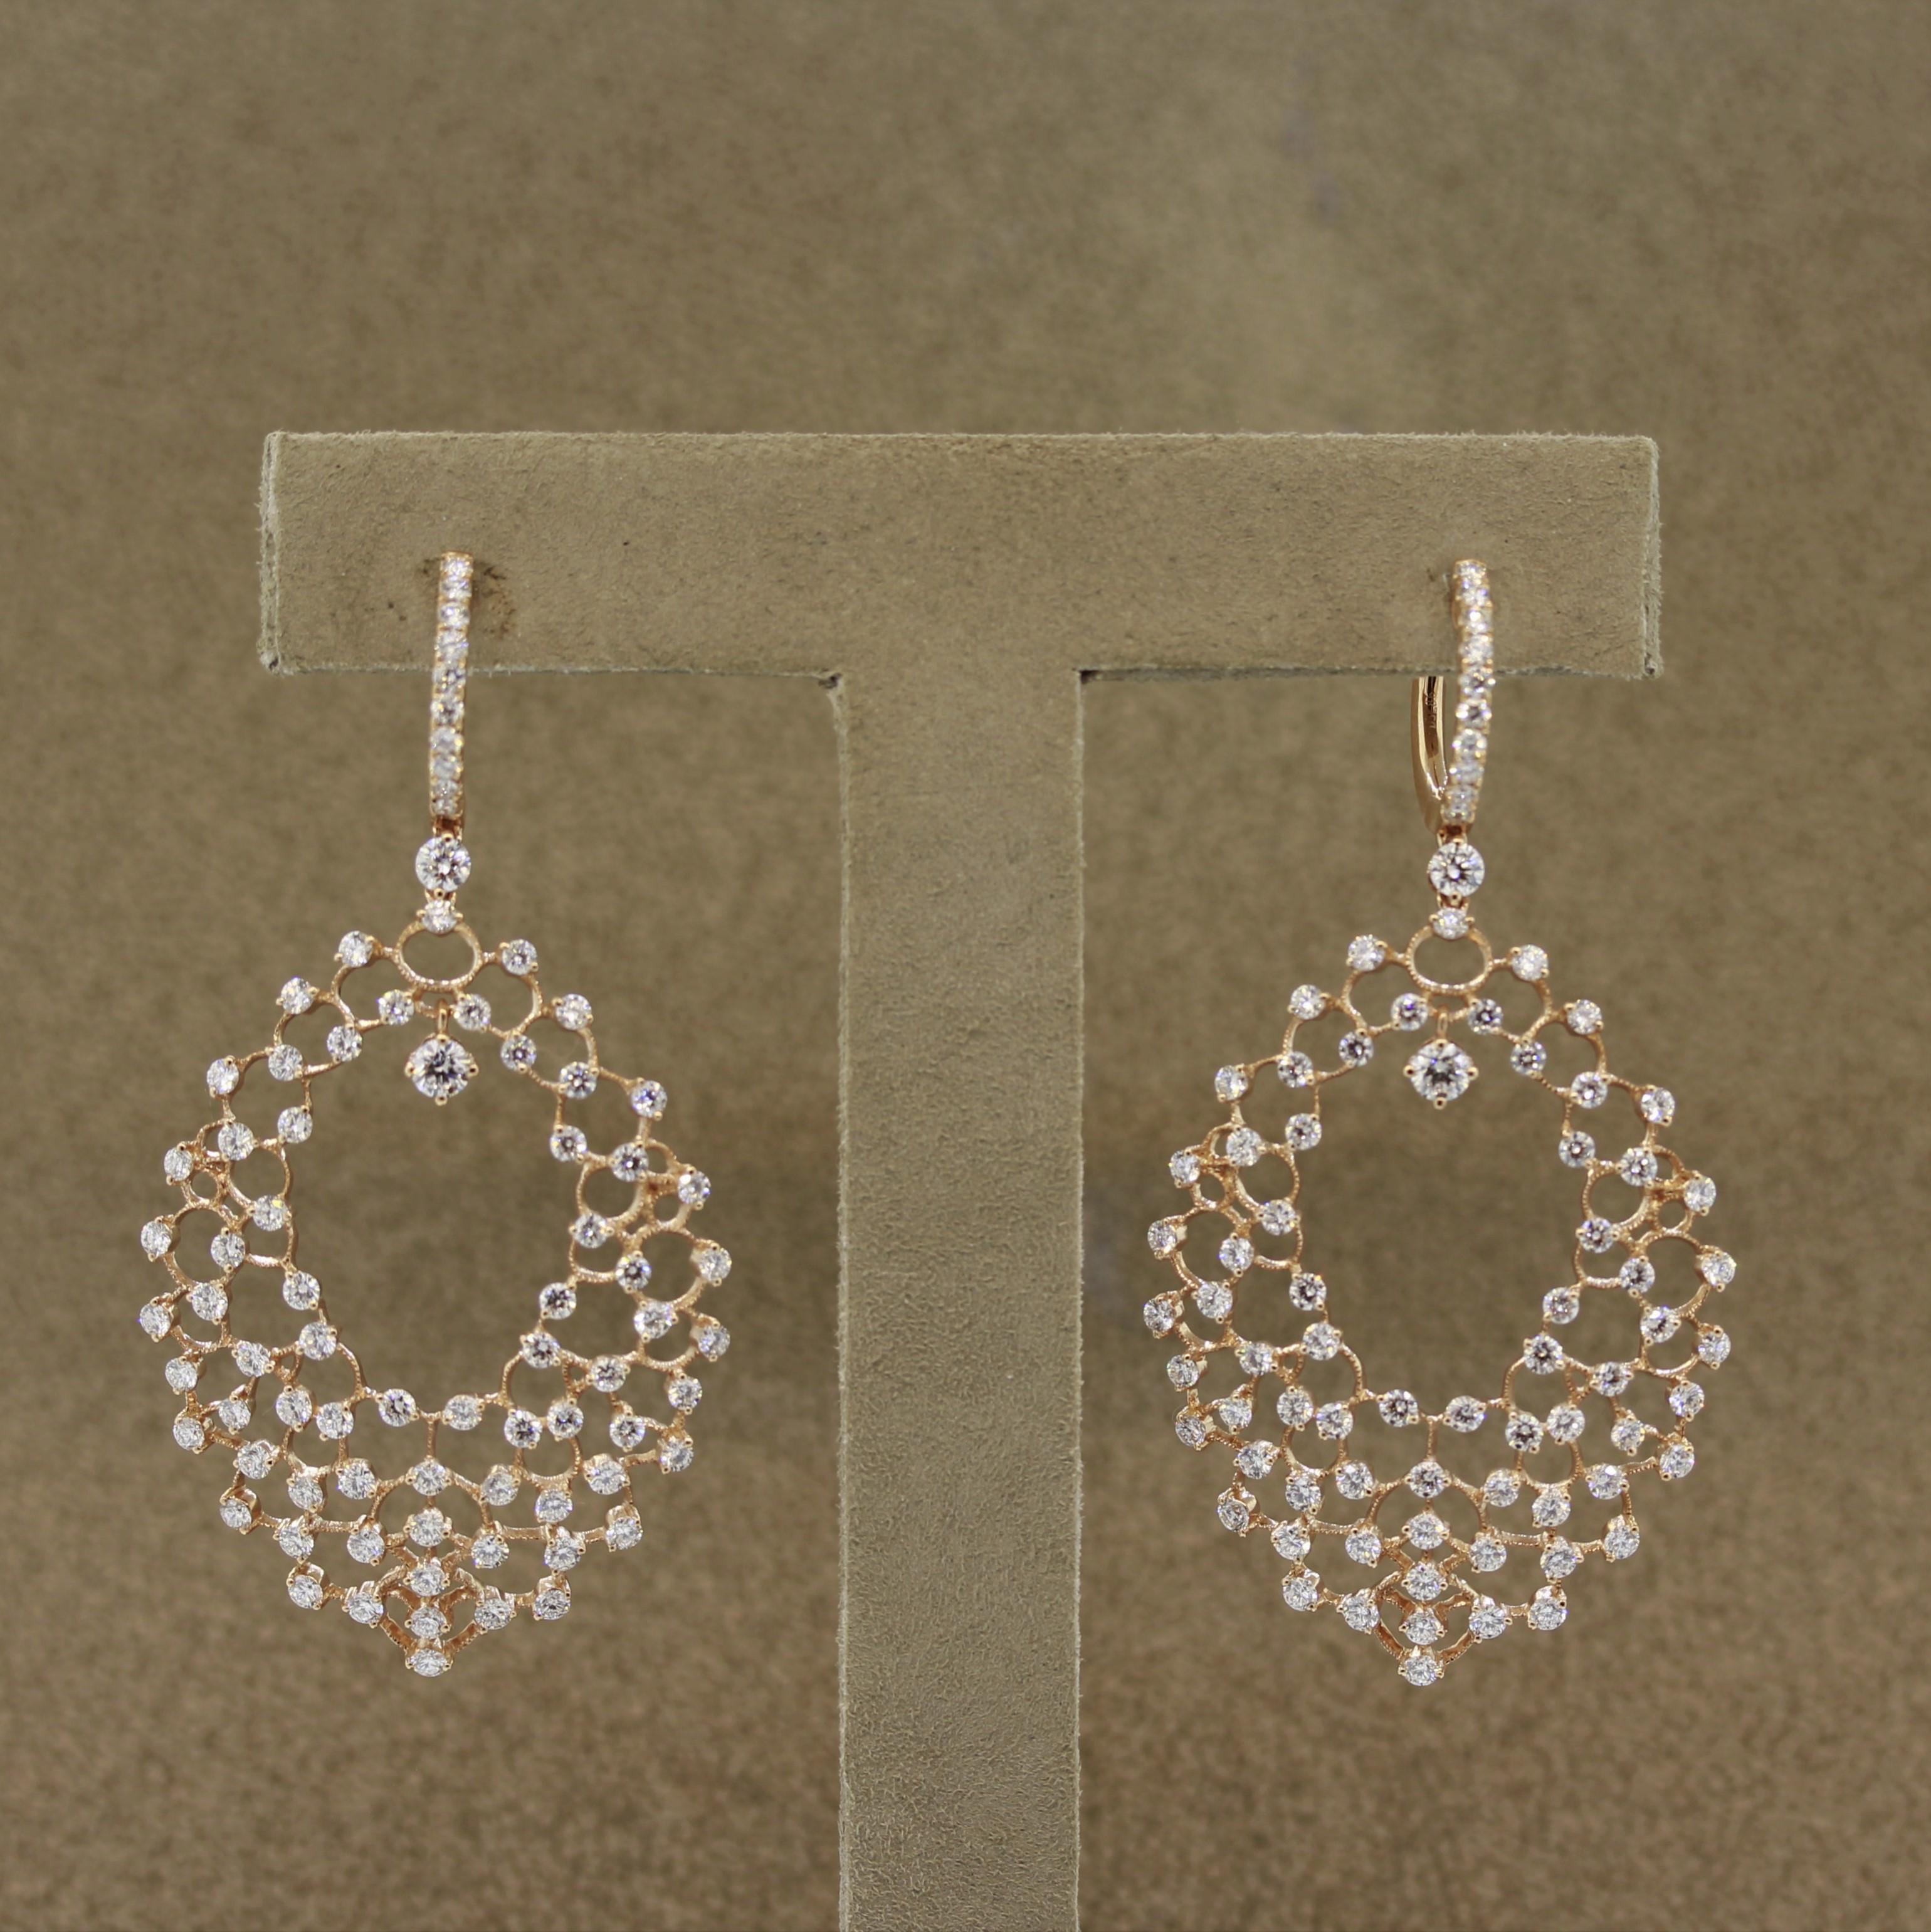 A web of diamonds! This fun yet chic pair of earrings feature 3.86 carats of round brilliant cut diamonds including a larger diamond which drops into the center of the earrings. Set in 18k rose gold, these will make a great addition to any outfit,